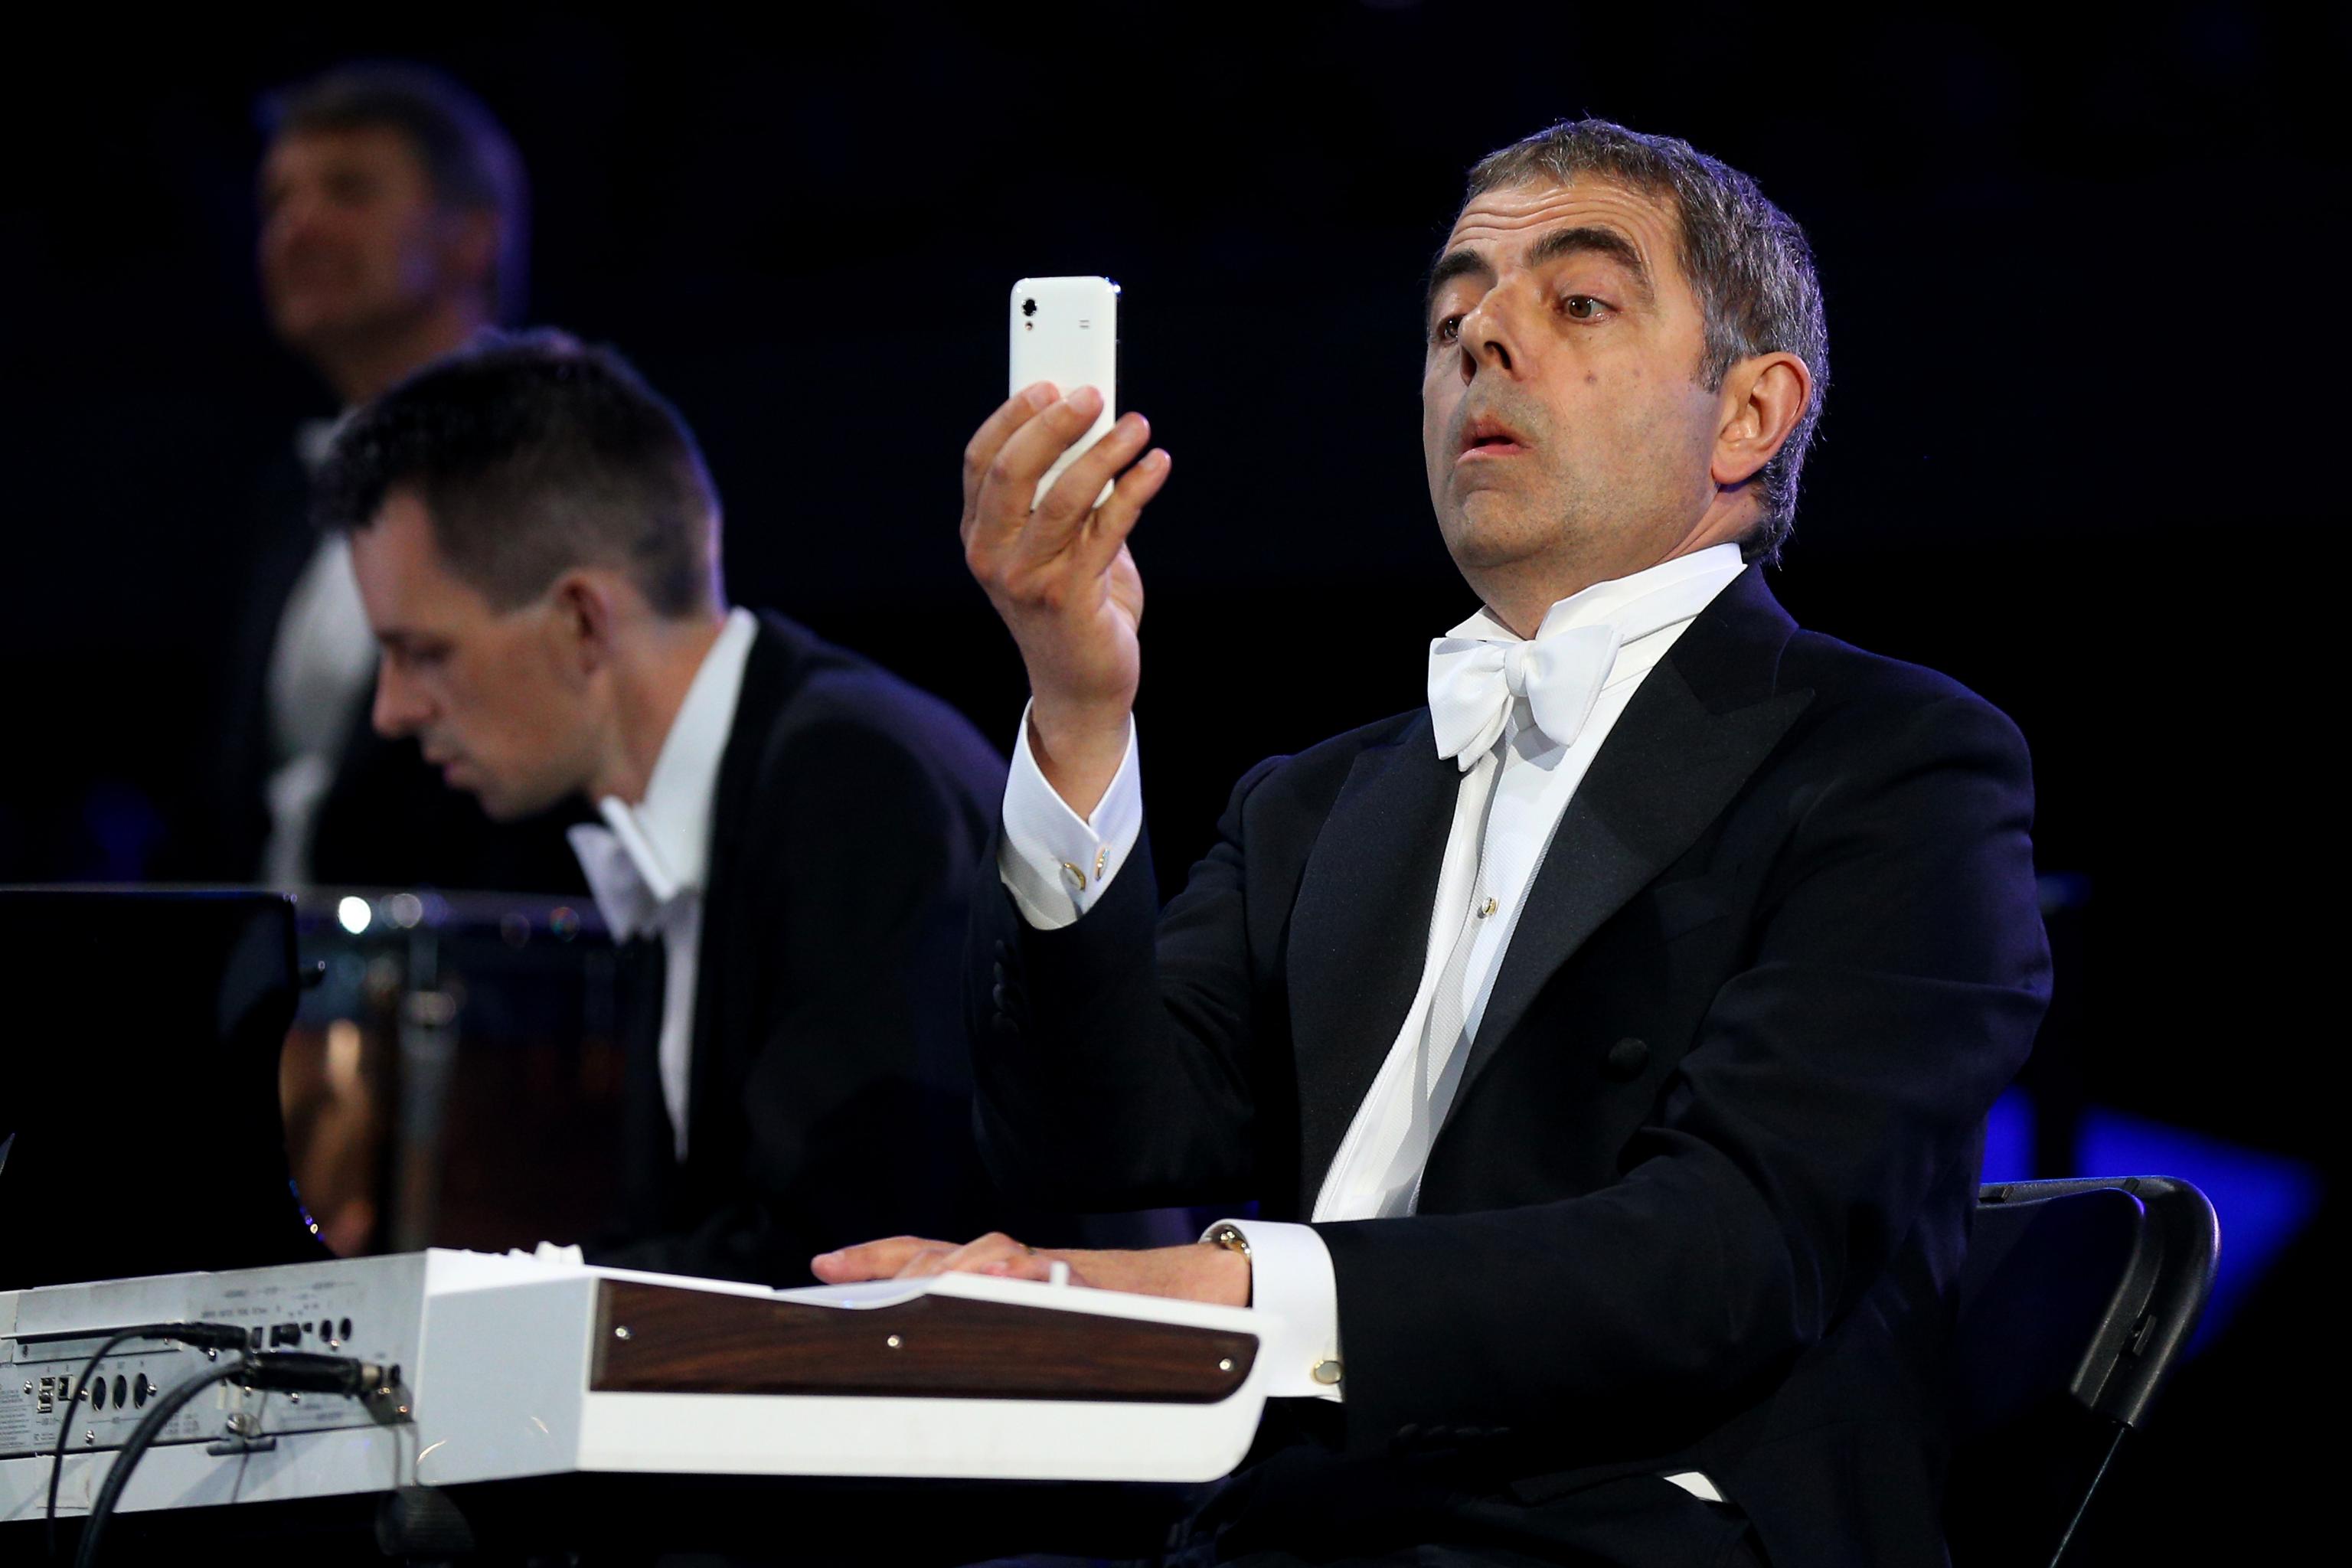 London 2012 Opening Ceremony Mr Bean Steals The Show In Spectacular Fashion Bleacher Report Latest News Videos And Highlights